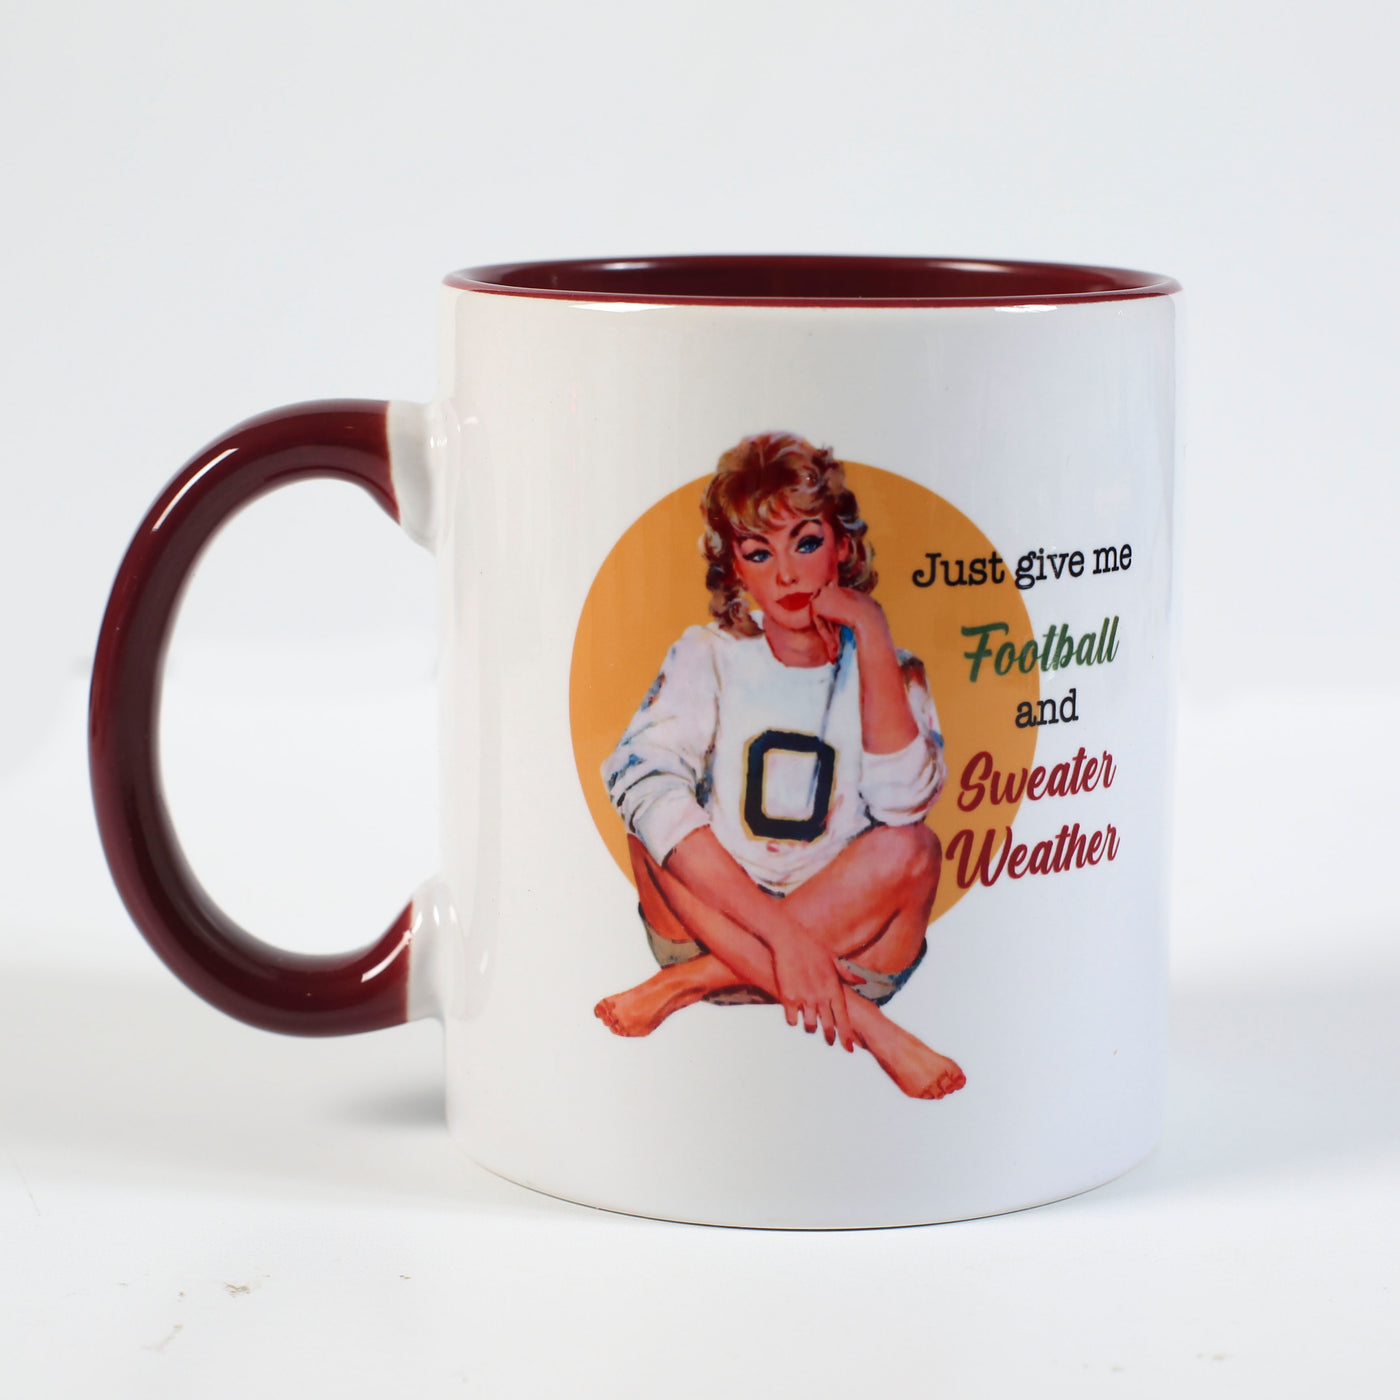 Give me football and sweater weather fall vintage pinup ceramic coffee or cocoa mug mod lounge paper company